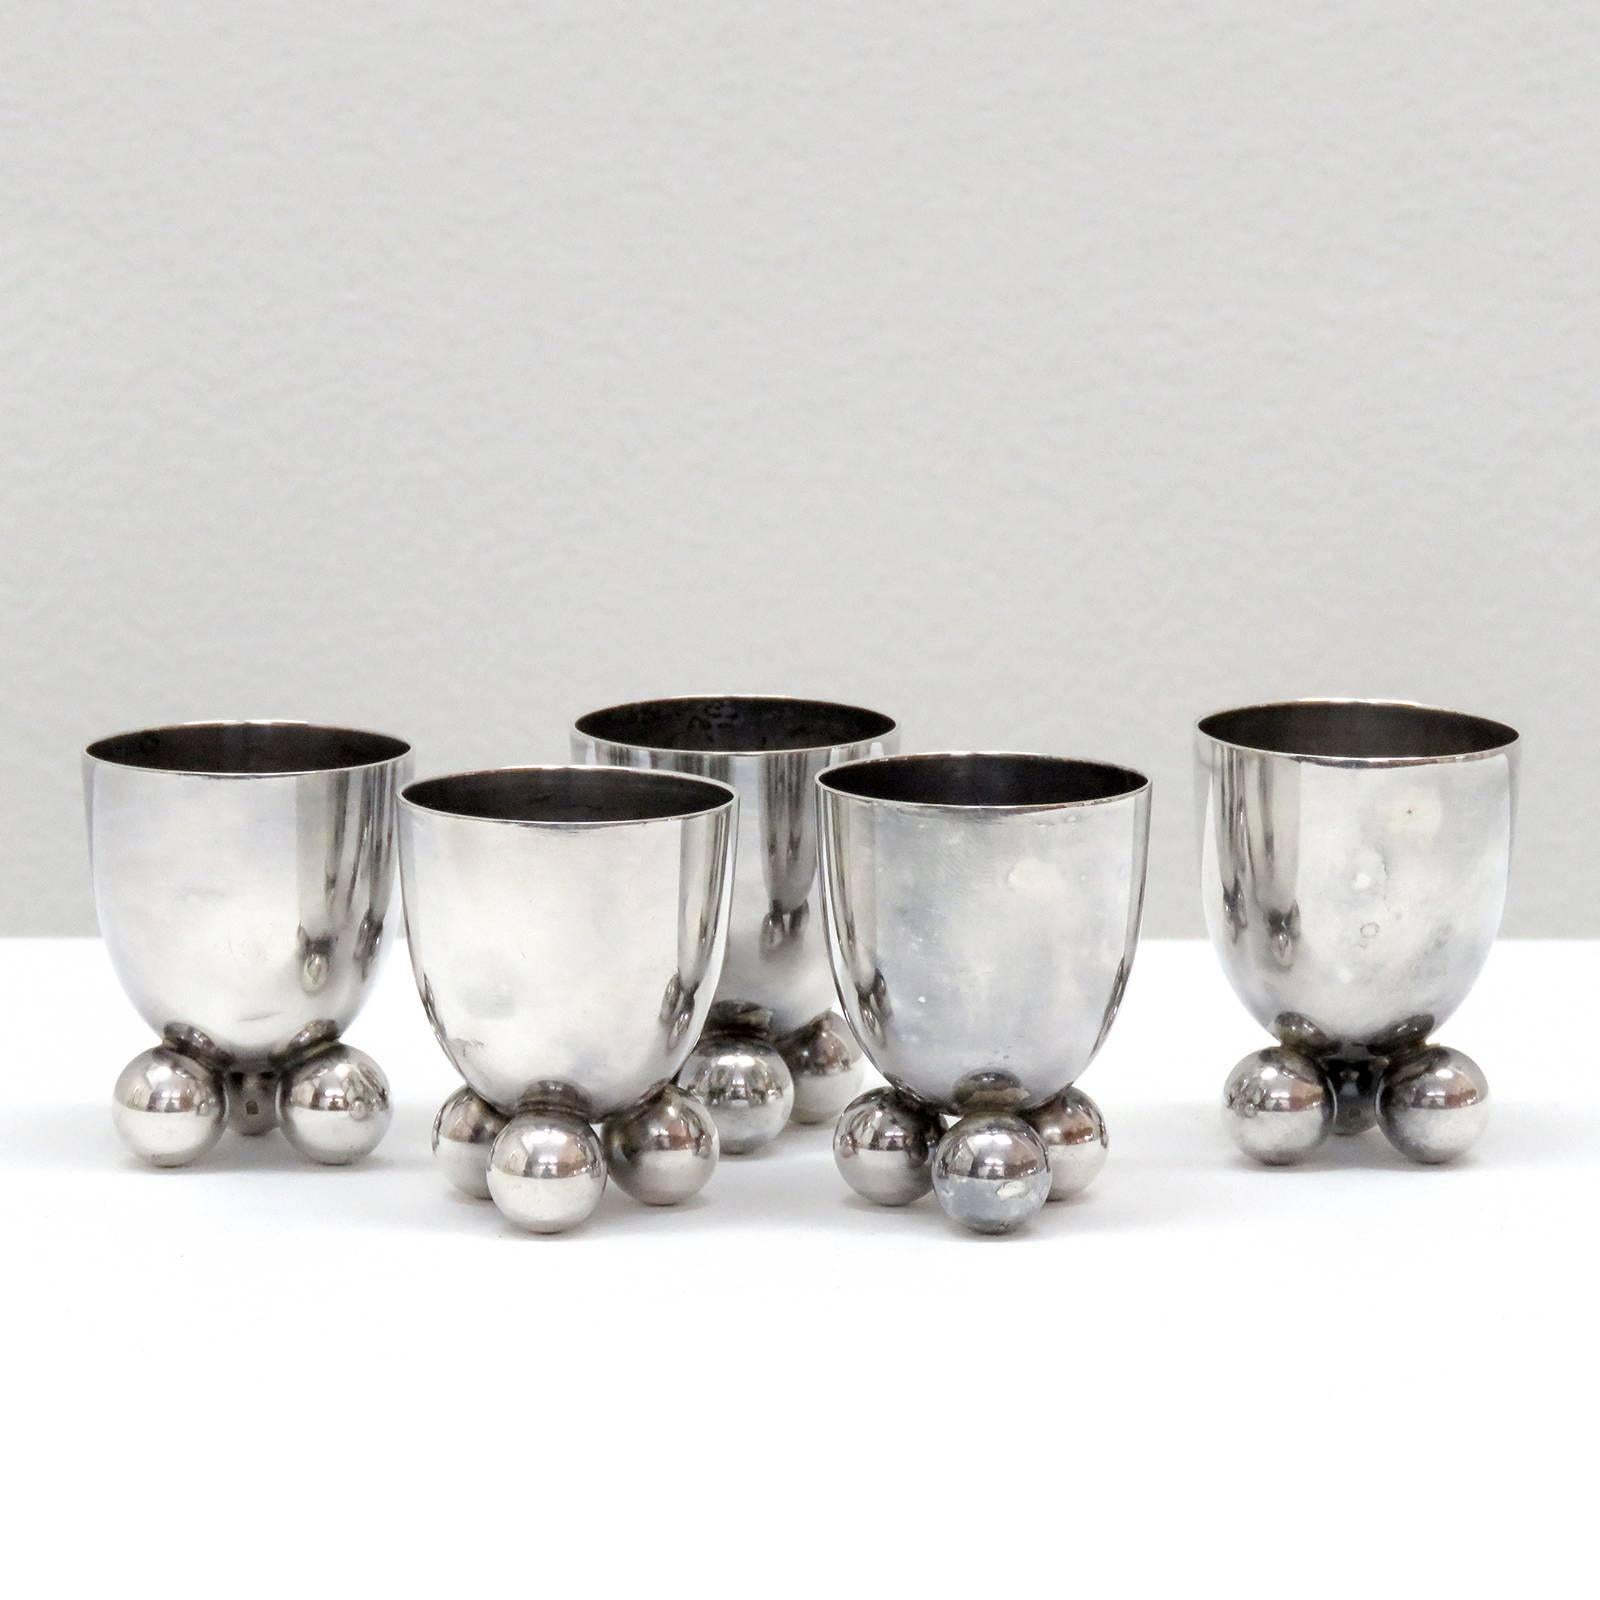 Wonderful set of five silver egg holders No.8154, by F. A. Breuhaus De Groot for WMF, each cup sits on three small solid spheres.